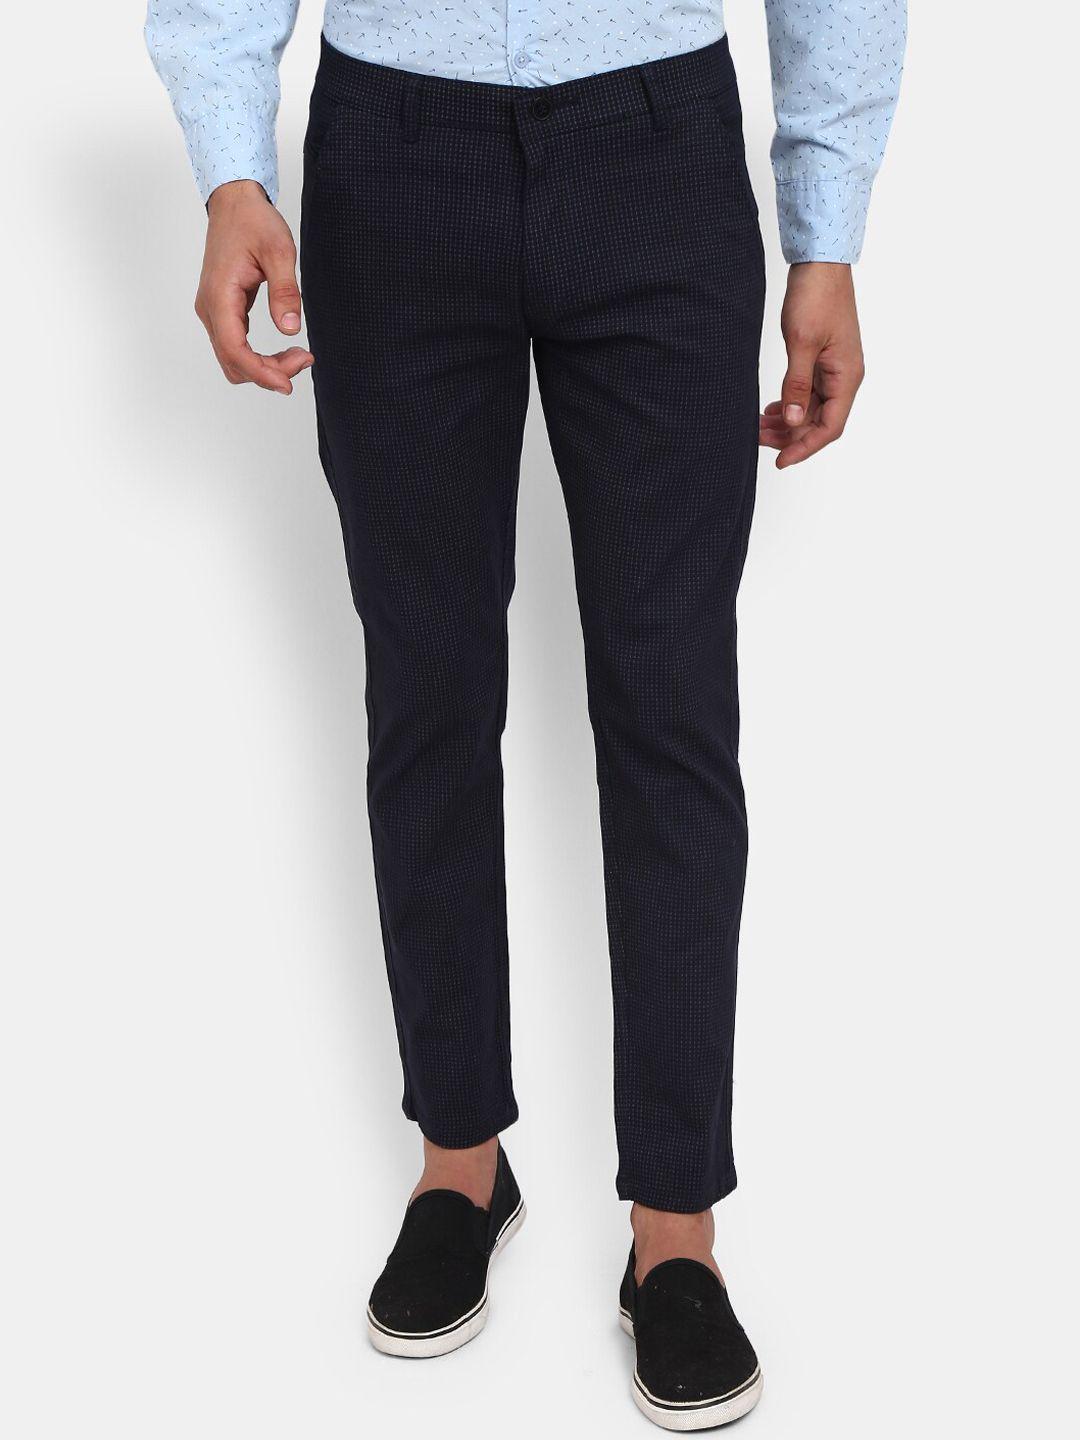 v-mart men navy blue checked classic cotton trousers